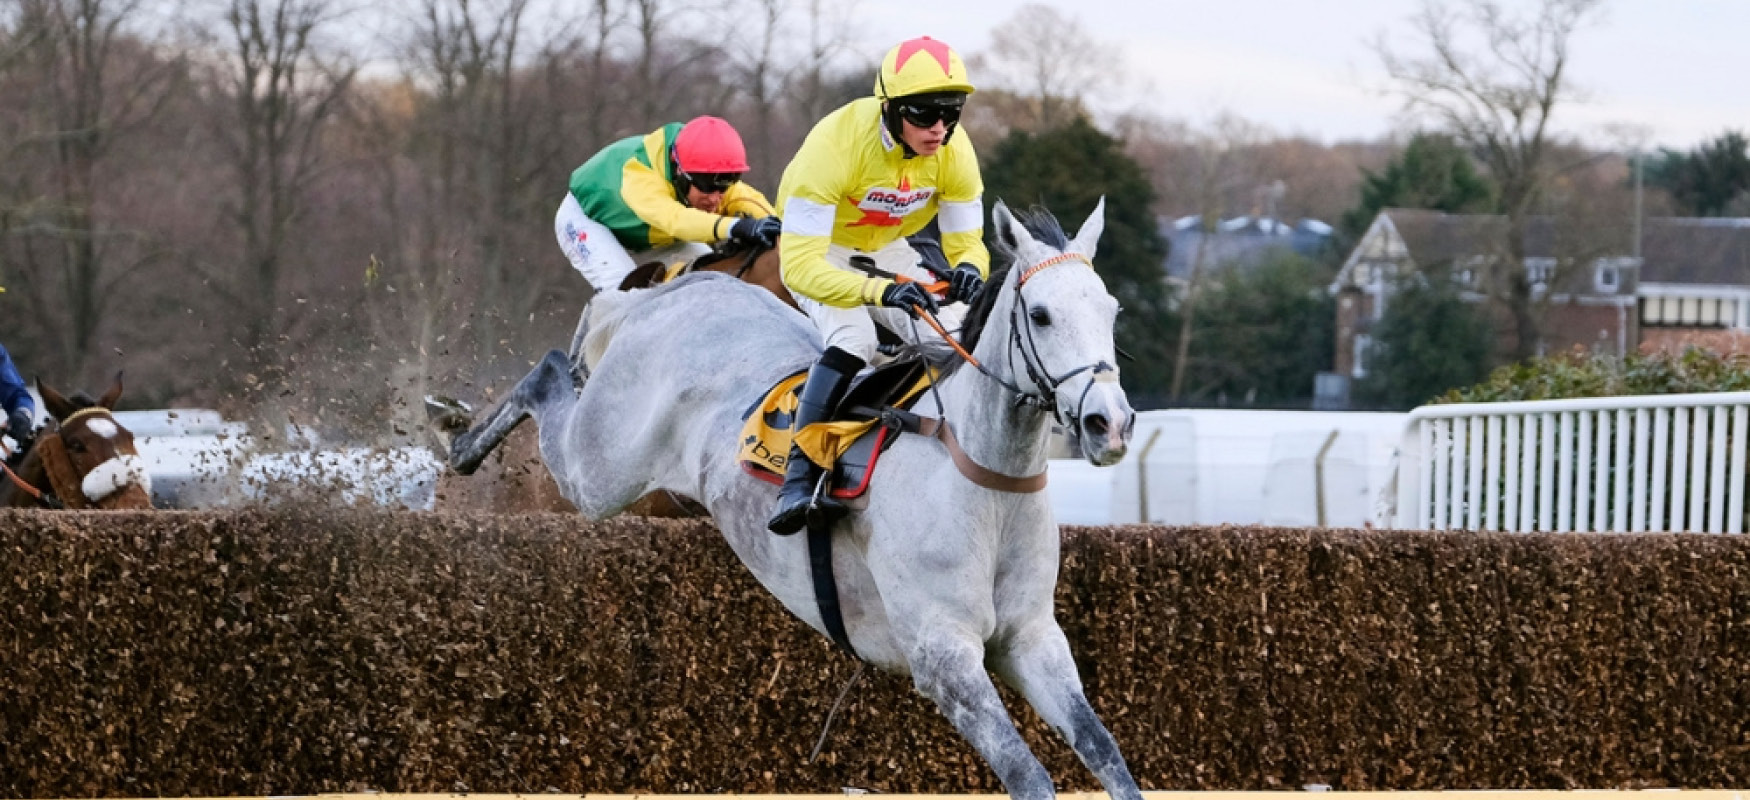 horse racing, contenders day, sandown park, esher, whats on, where to go, events, racing, surrey